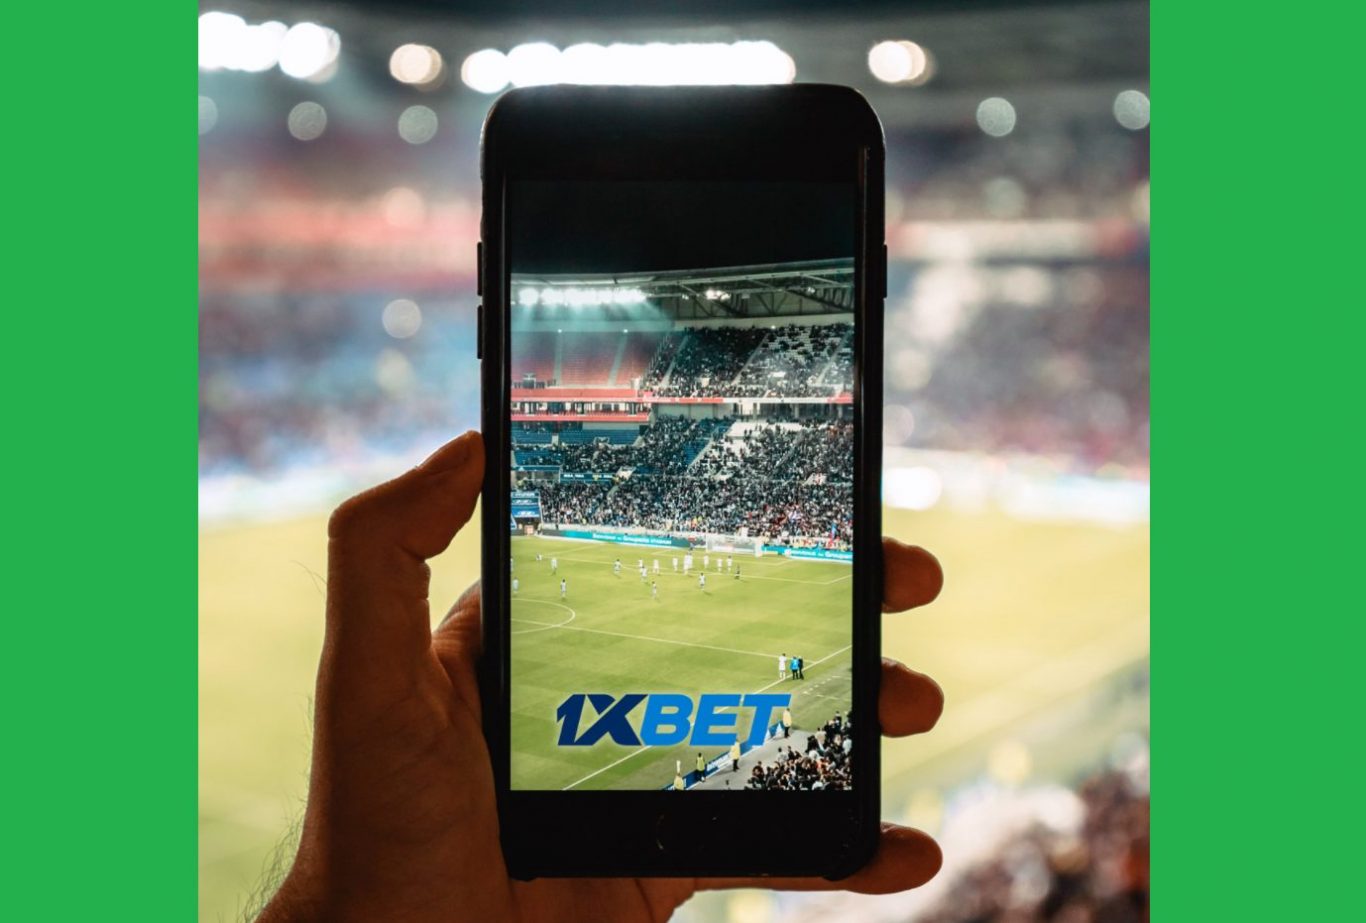 1xBet apk download for Android devices